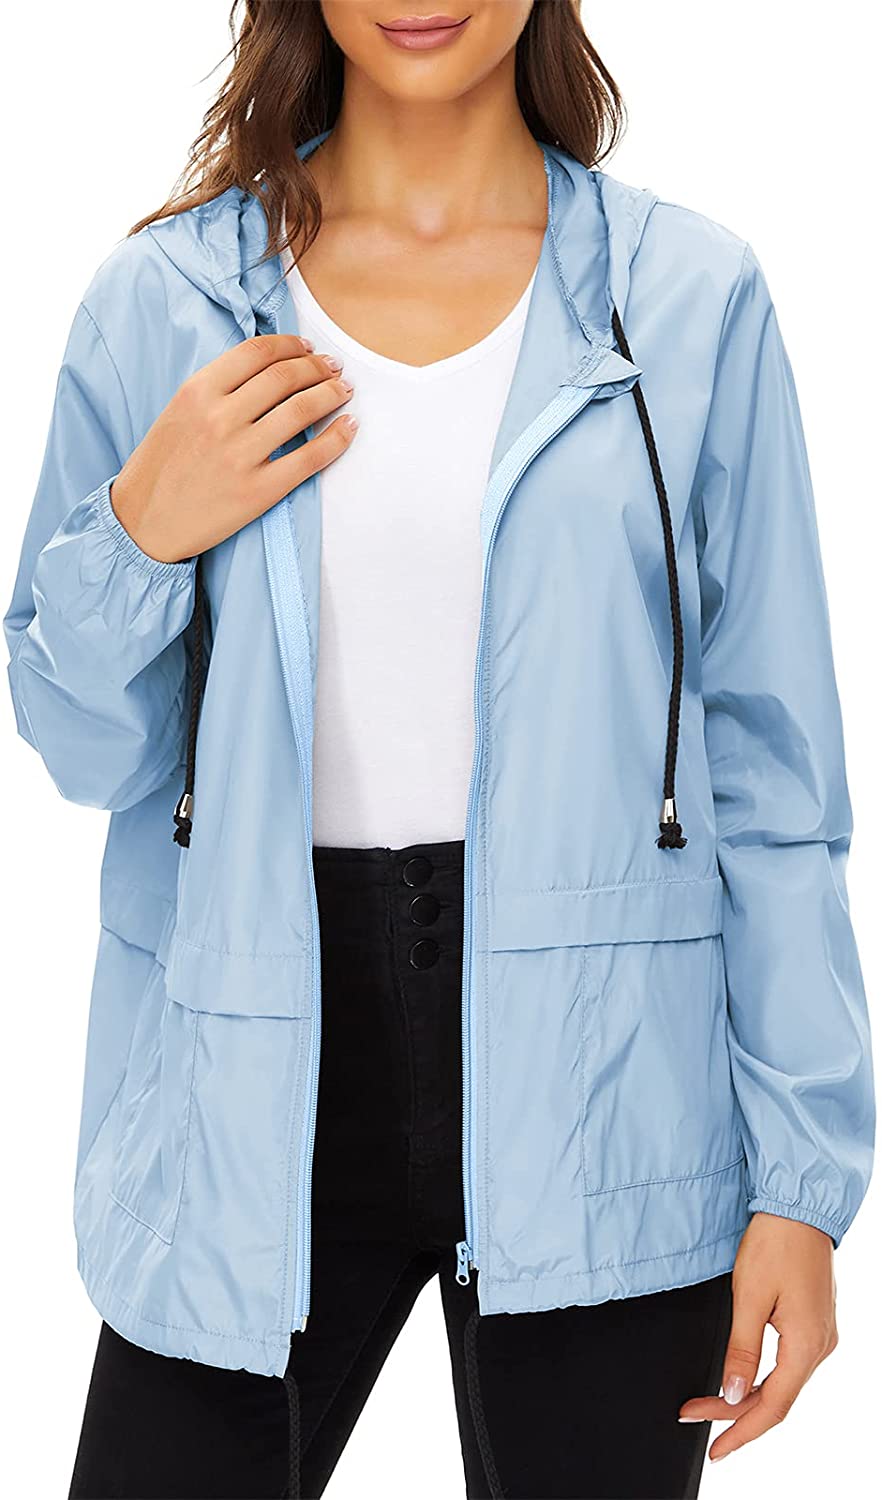 time-limited Specials Century Star Plus Size Rain Jackets for Women ...